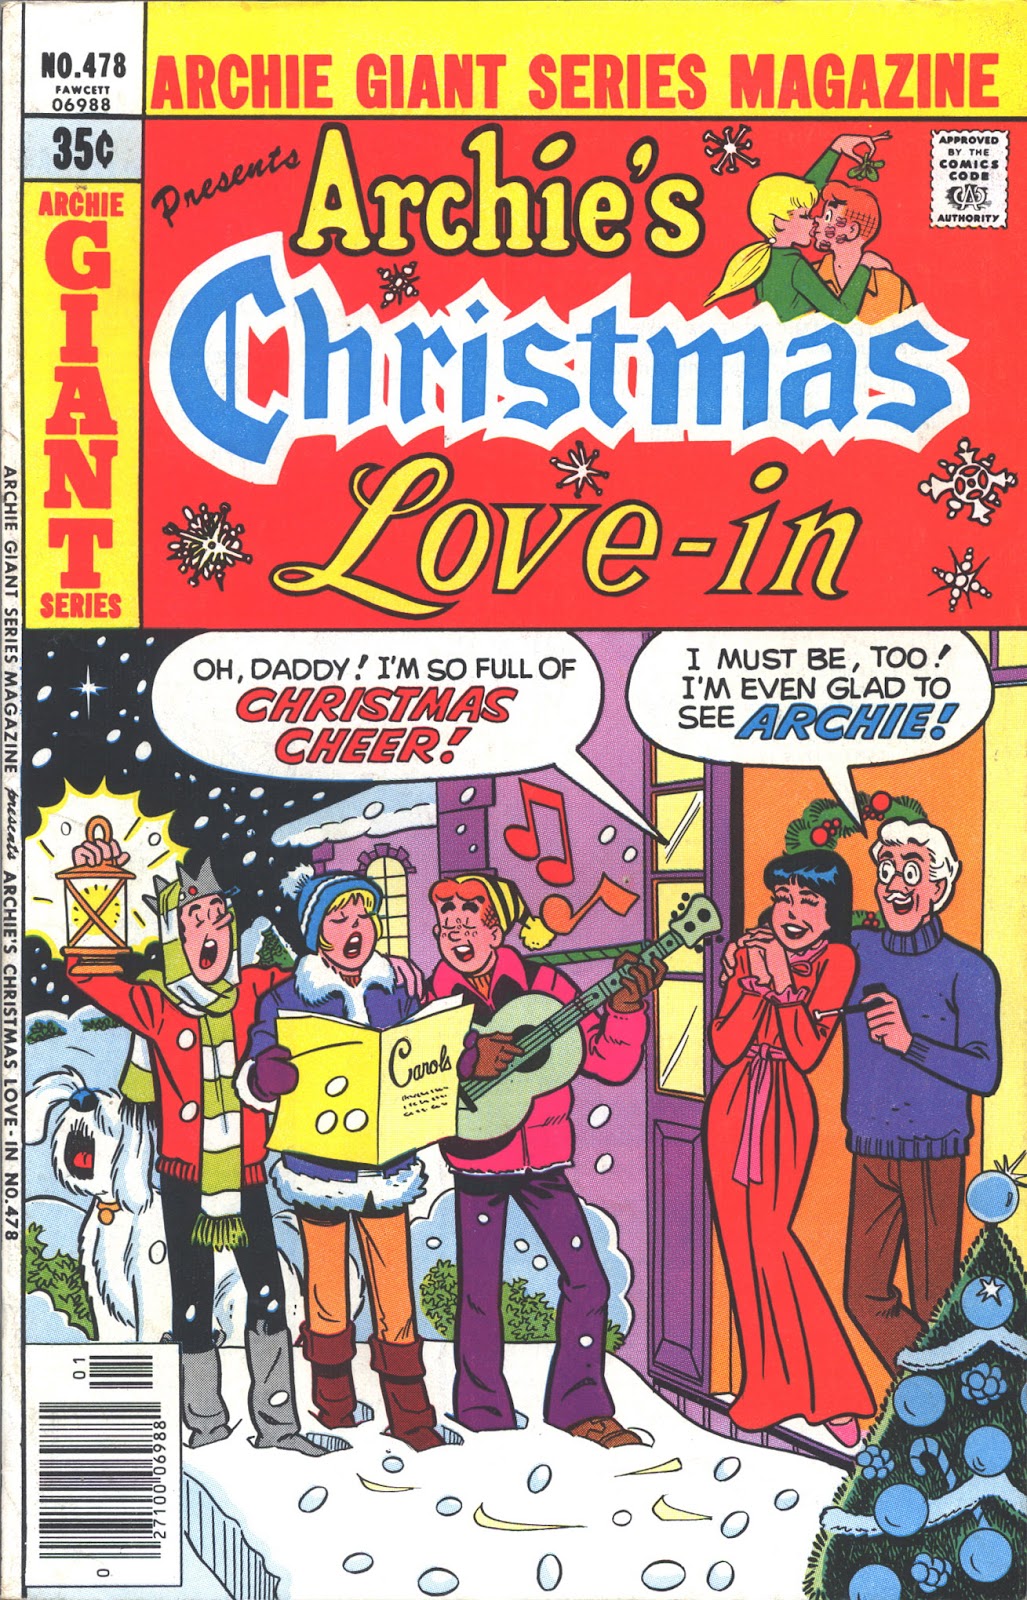 Archie Giant Series Magazine 478 Page 1